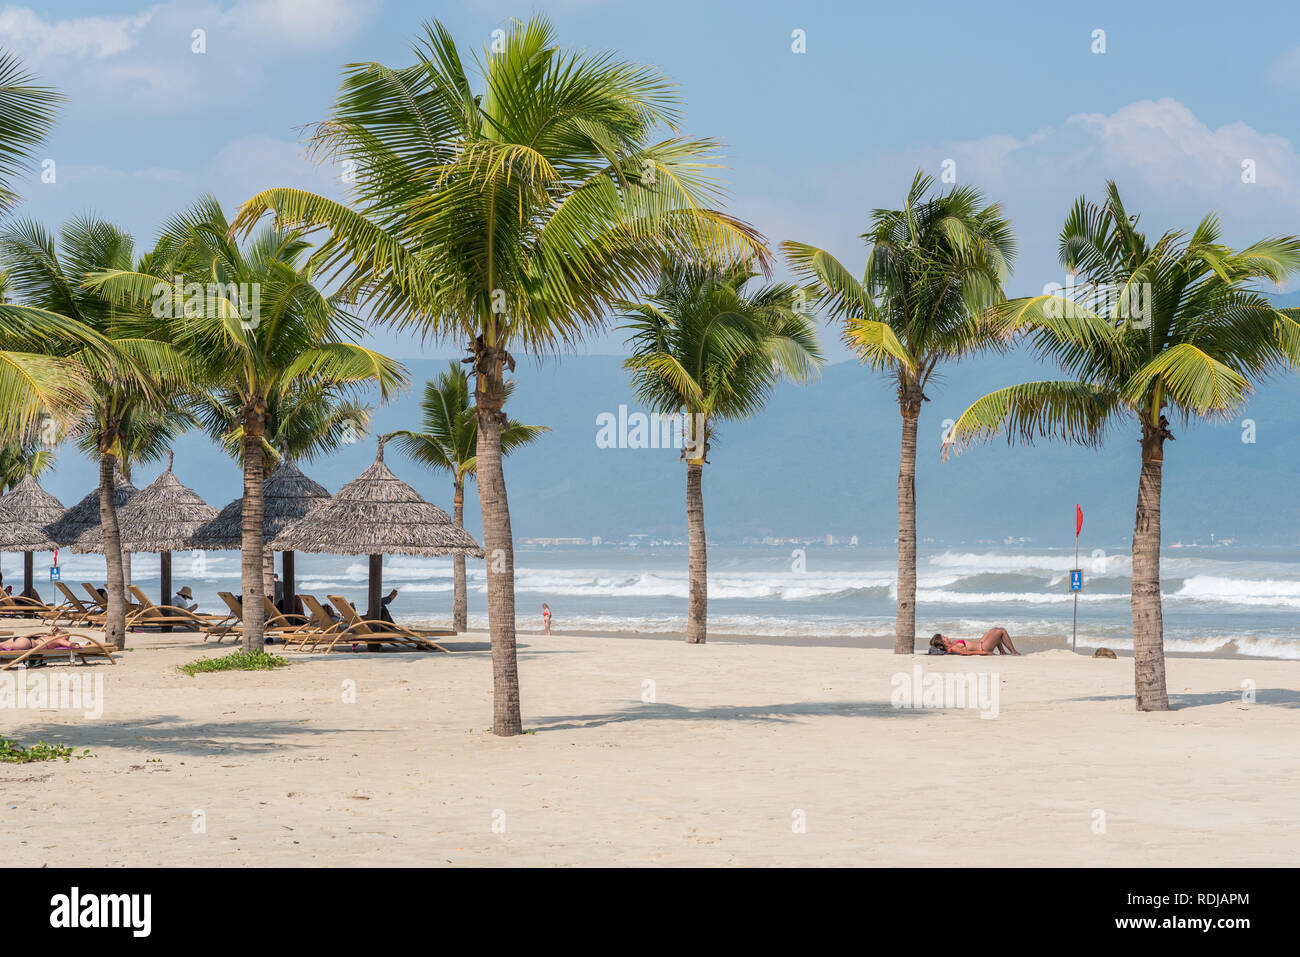 Danang, Vietnam - November 1, 2018: My Khe beach with several coconut trees, straw umbrellas and several sunbathing tourists. Stock Photo